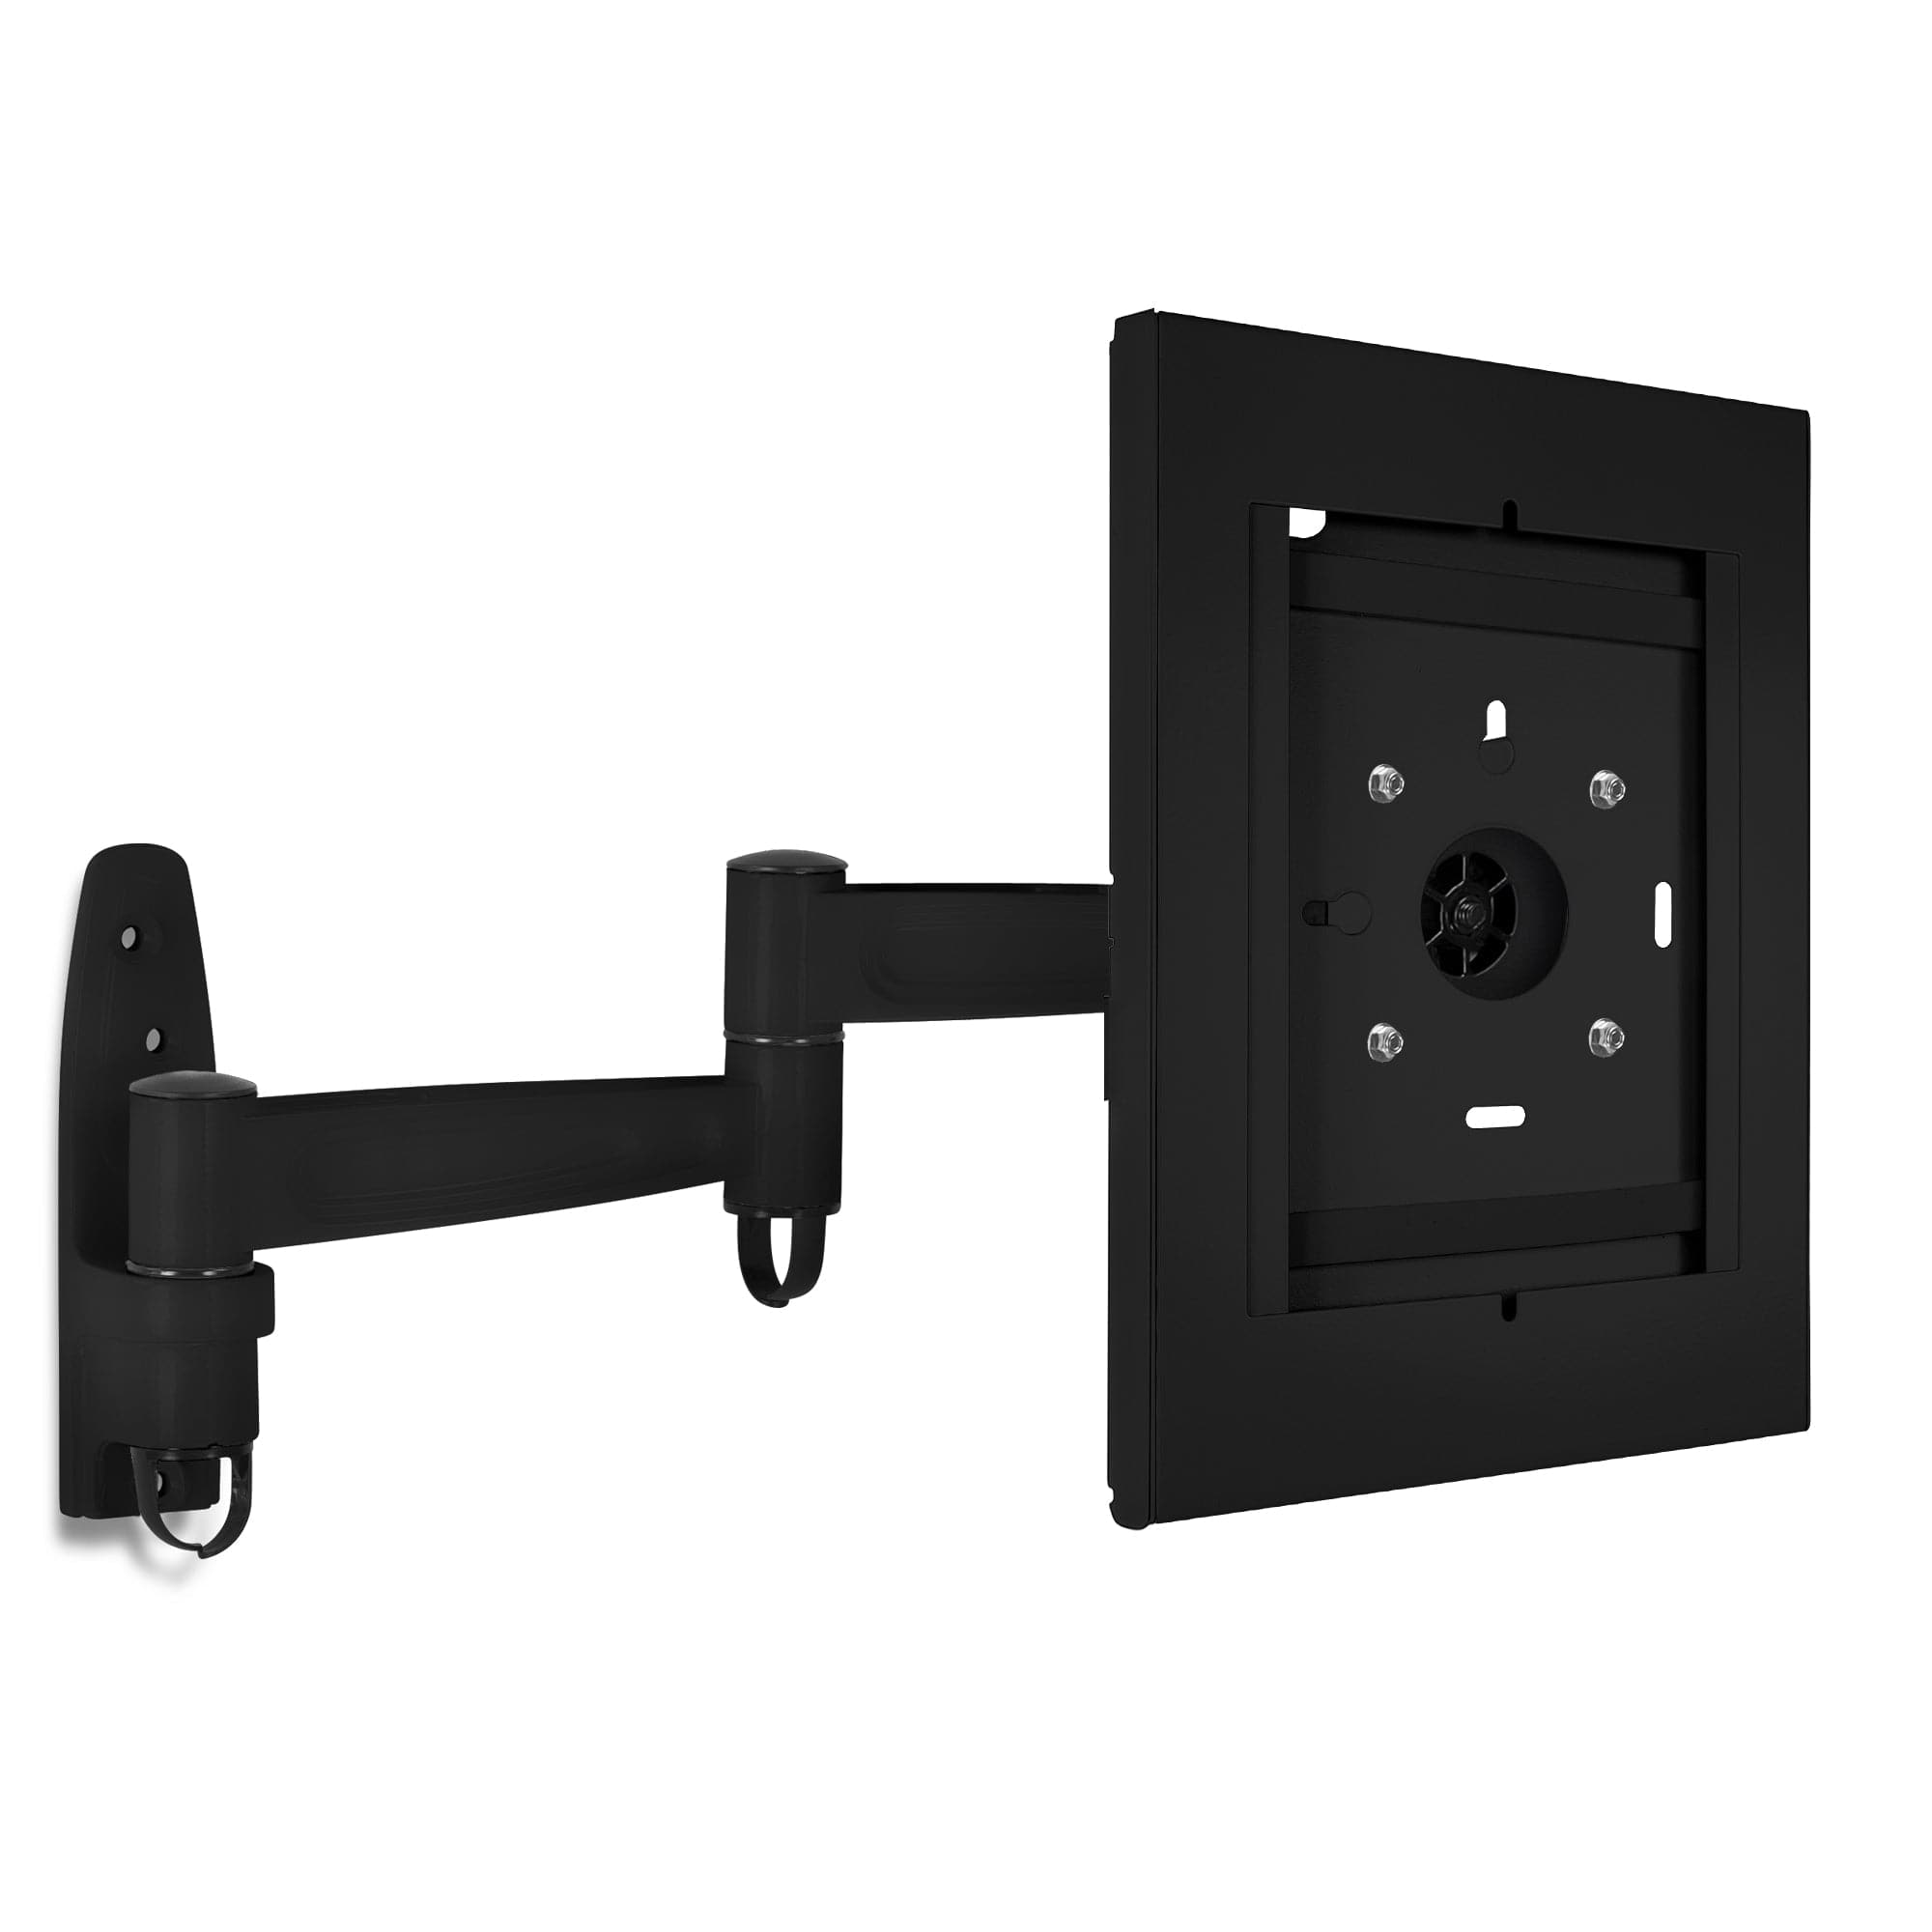 Secure iPad Wall Mount Enclosure w/ Swing Arm for iPad 7 - Mount-It!